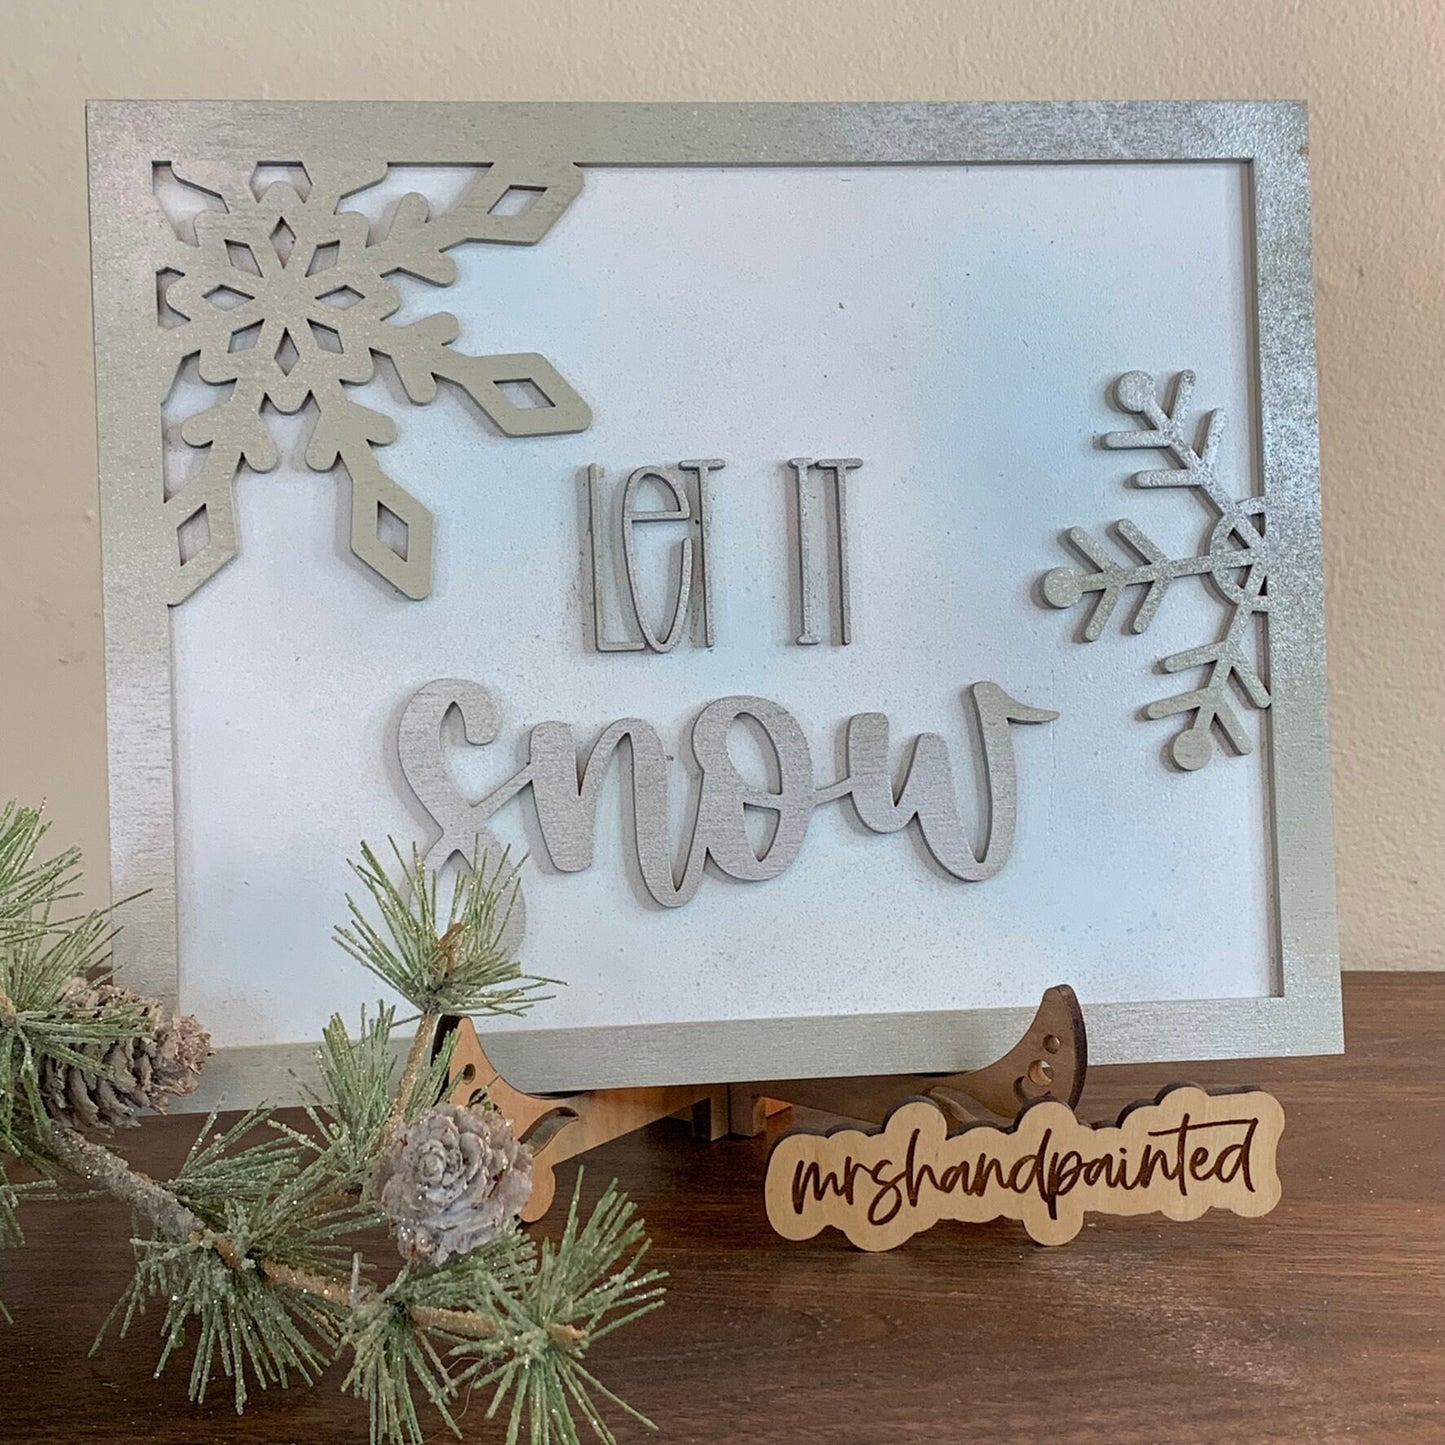 Let it Snow - Layered Snowflake Sign ~ - Laser Cut Wood